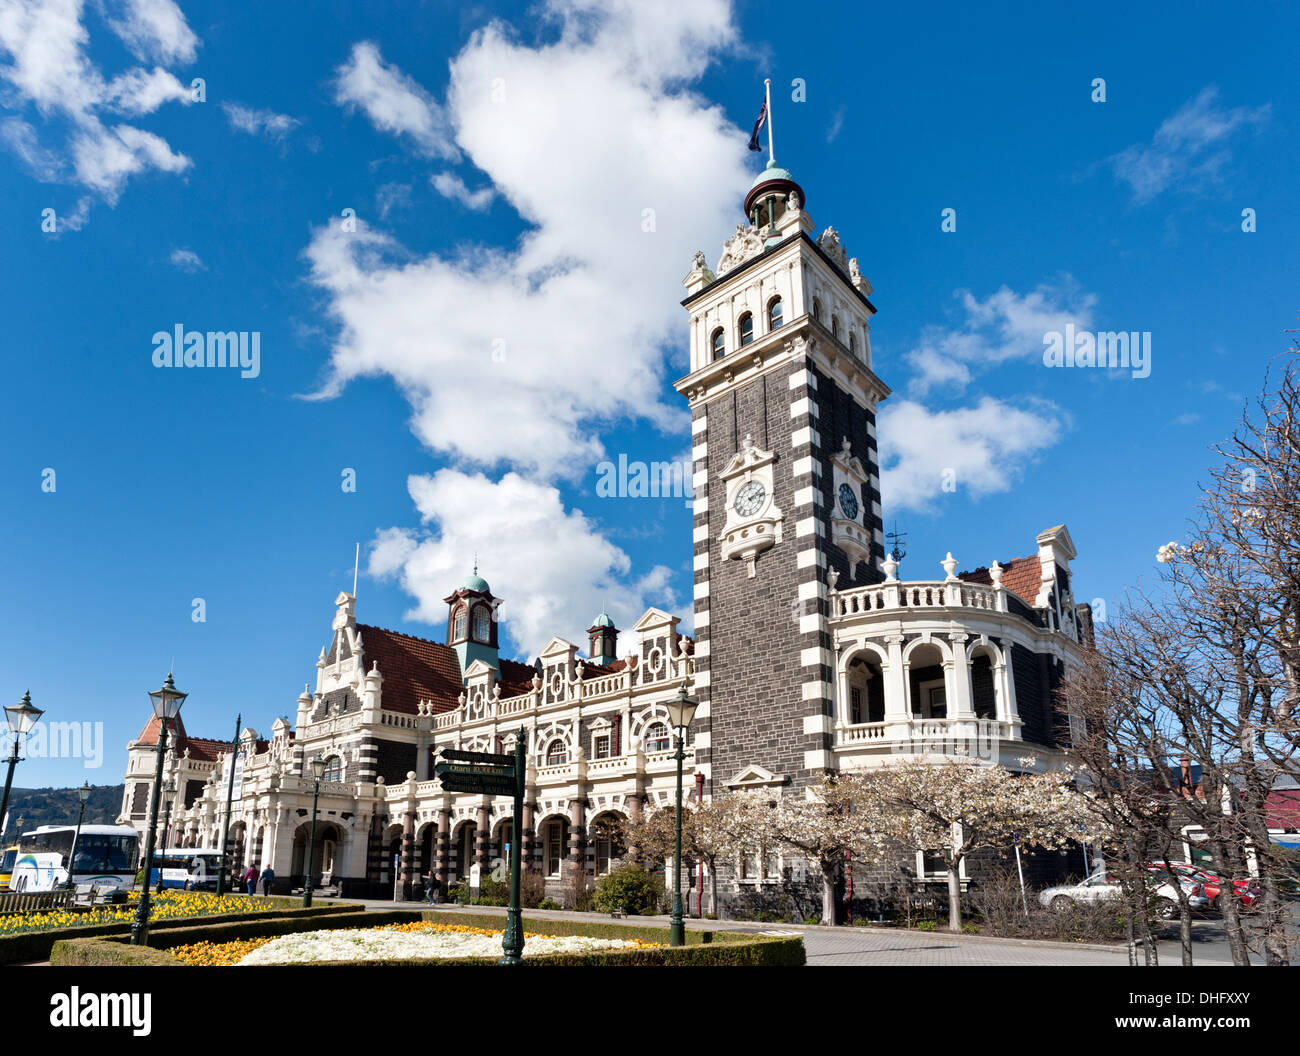 Dunedin, Otago, New Zealand. The famous railway station designed by Sir George Troup. Stock Photo